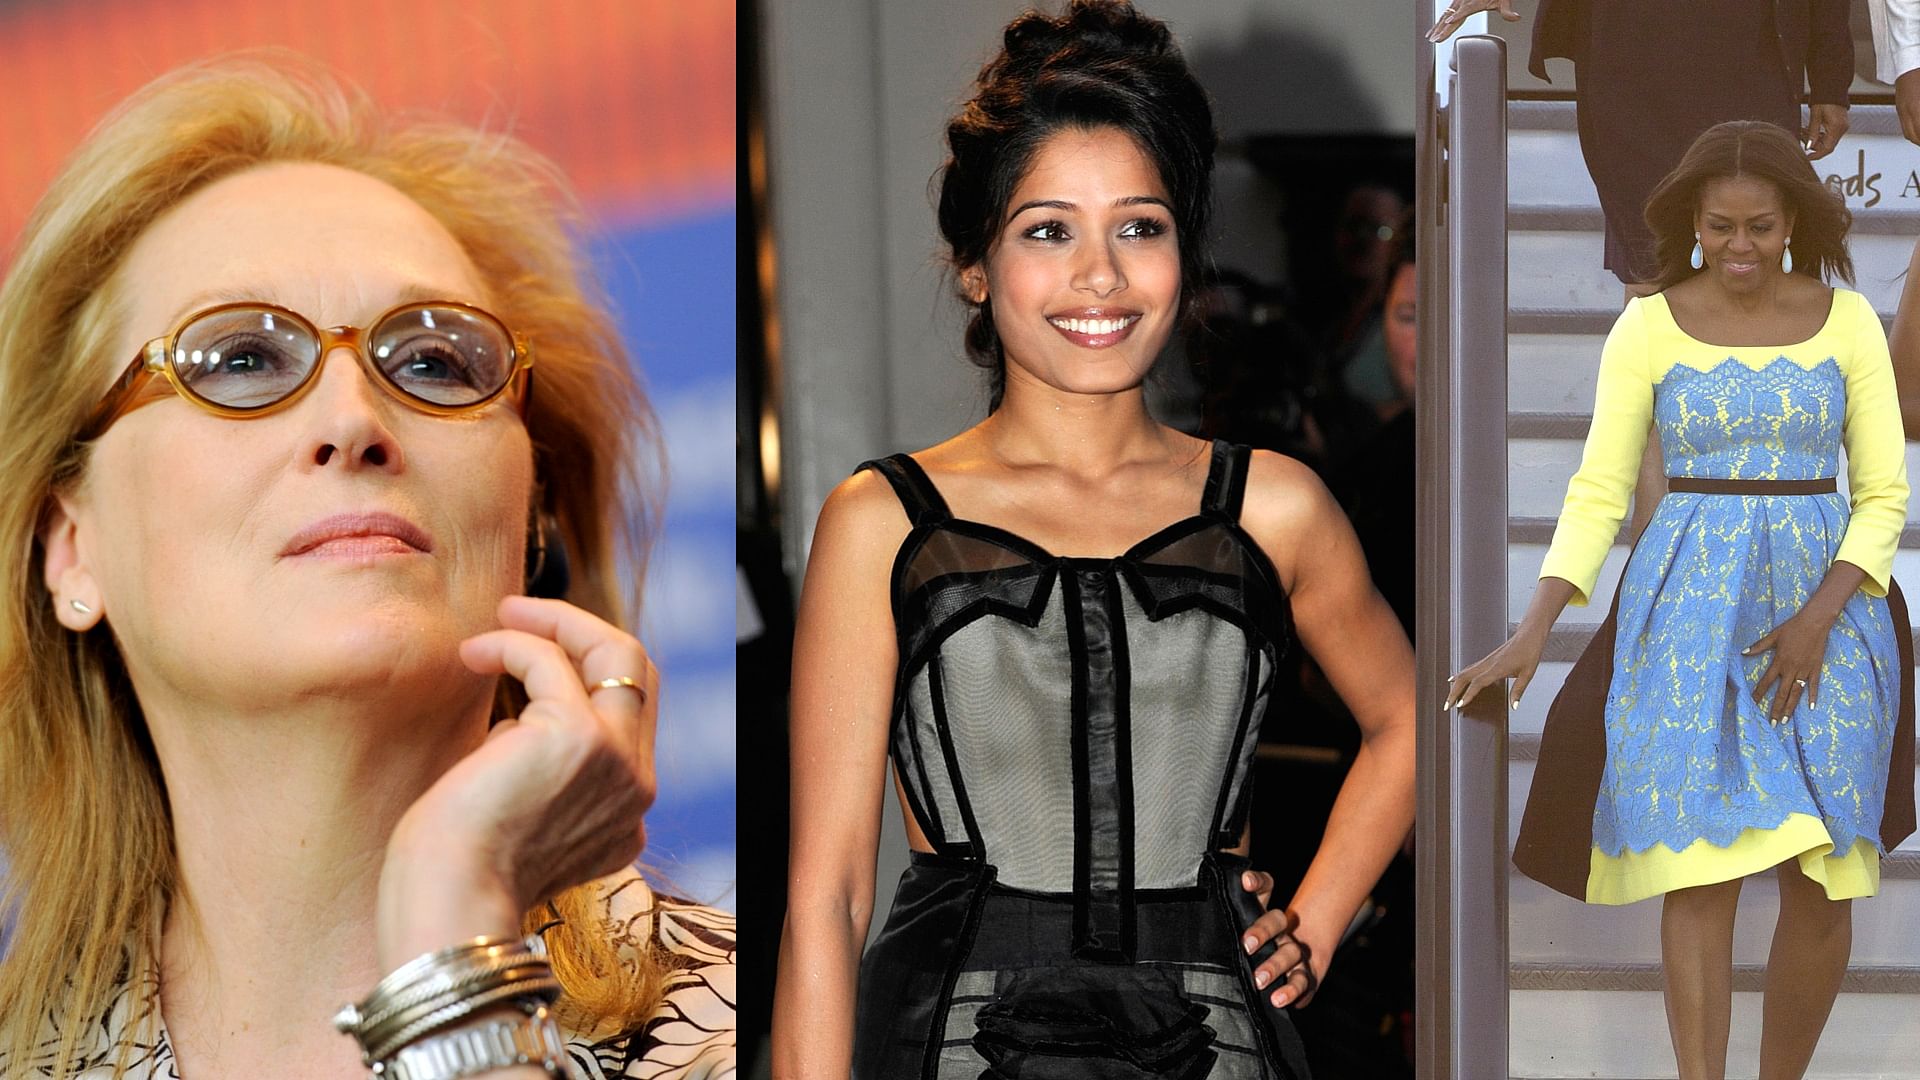 Meryl Streep, Freida Pinto and Michelle Obama will travel together to promote women’s education (Photos: Reuters)